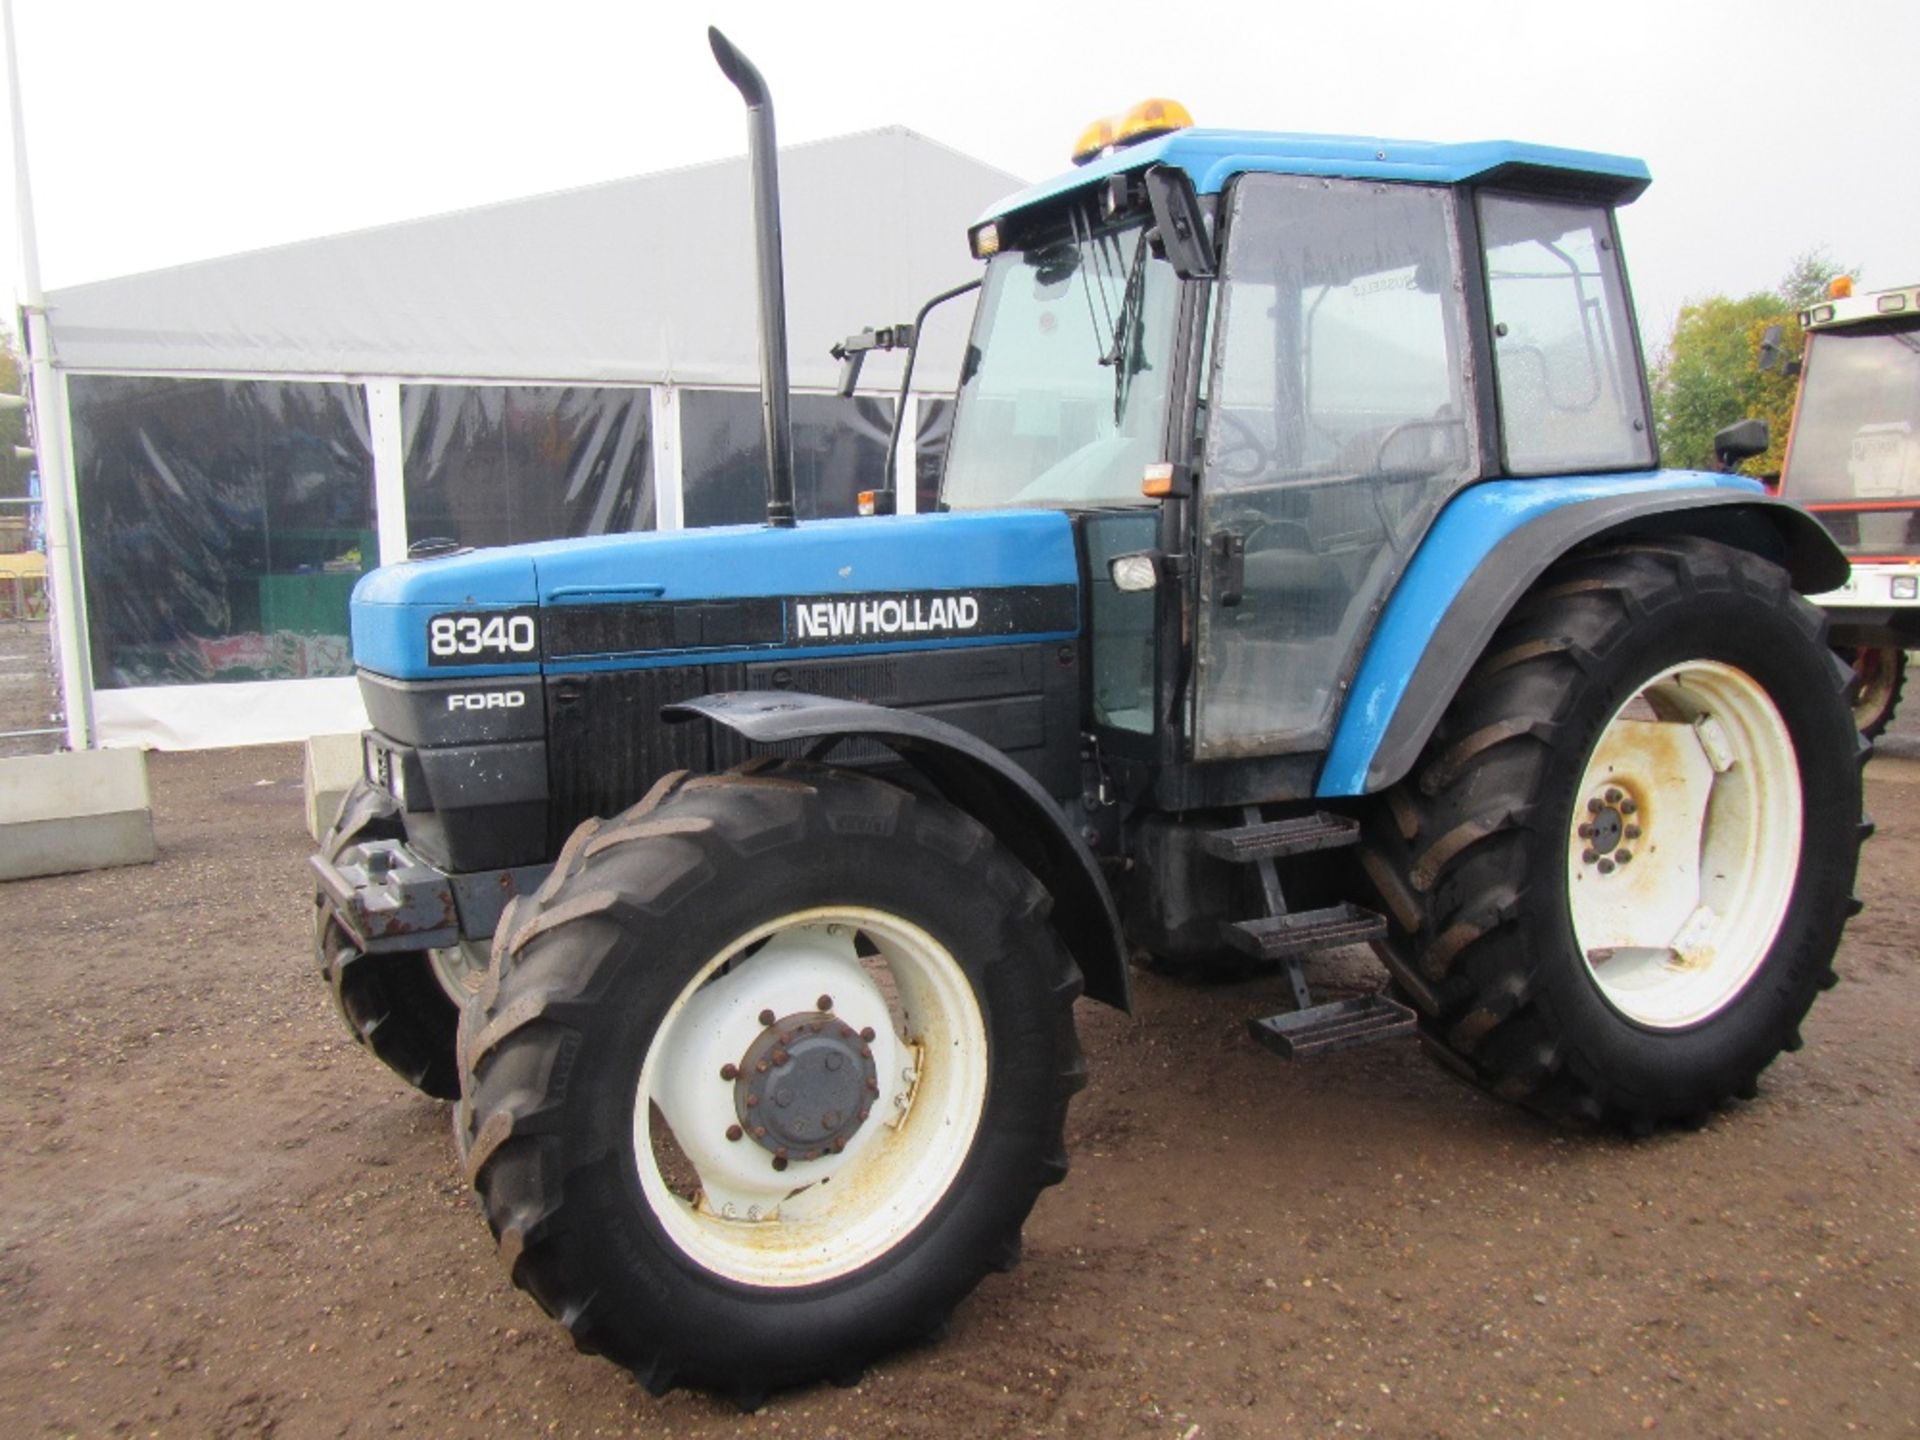 New Holland 8340 SLE 4wd Tractor. 2 Spools, Air Seat, 520/70x38, 420/70x28 Tyres. 4222 Hrs. Reg No